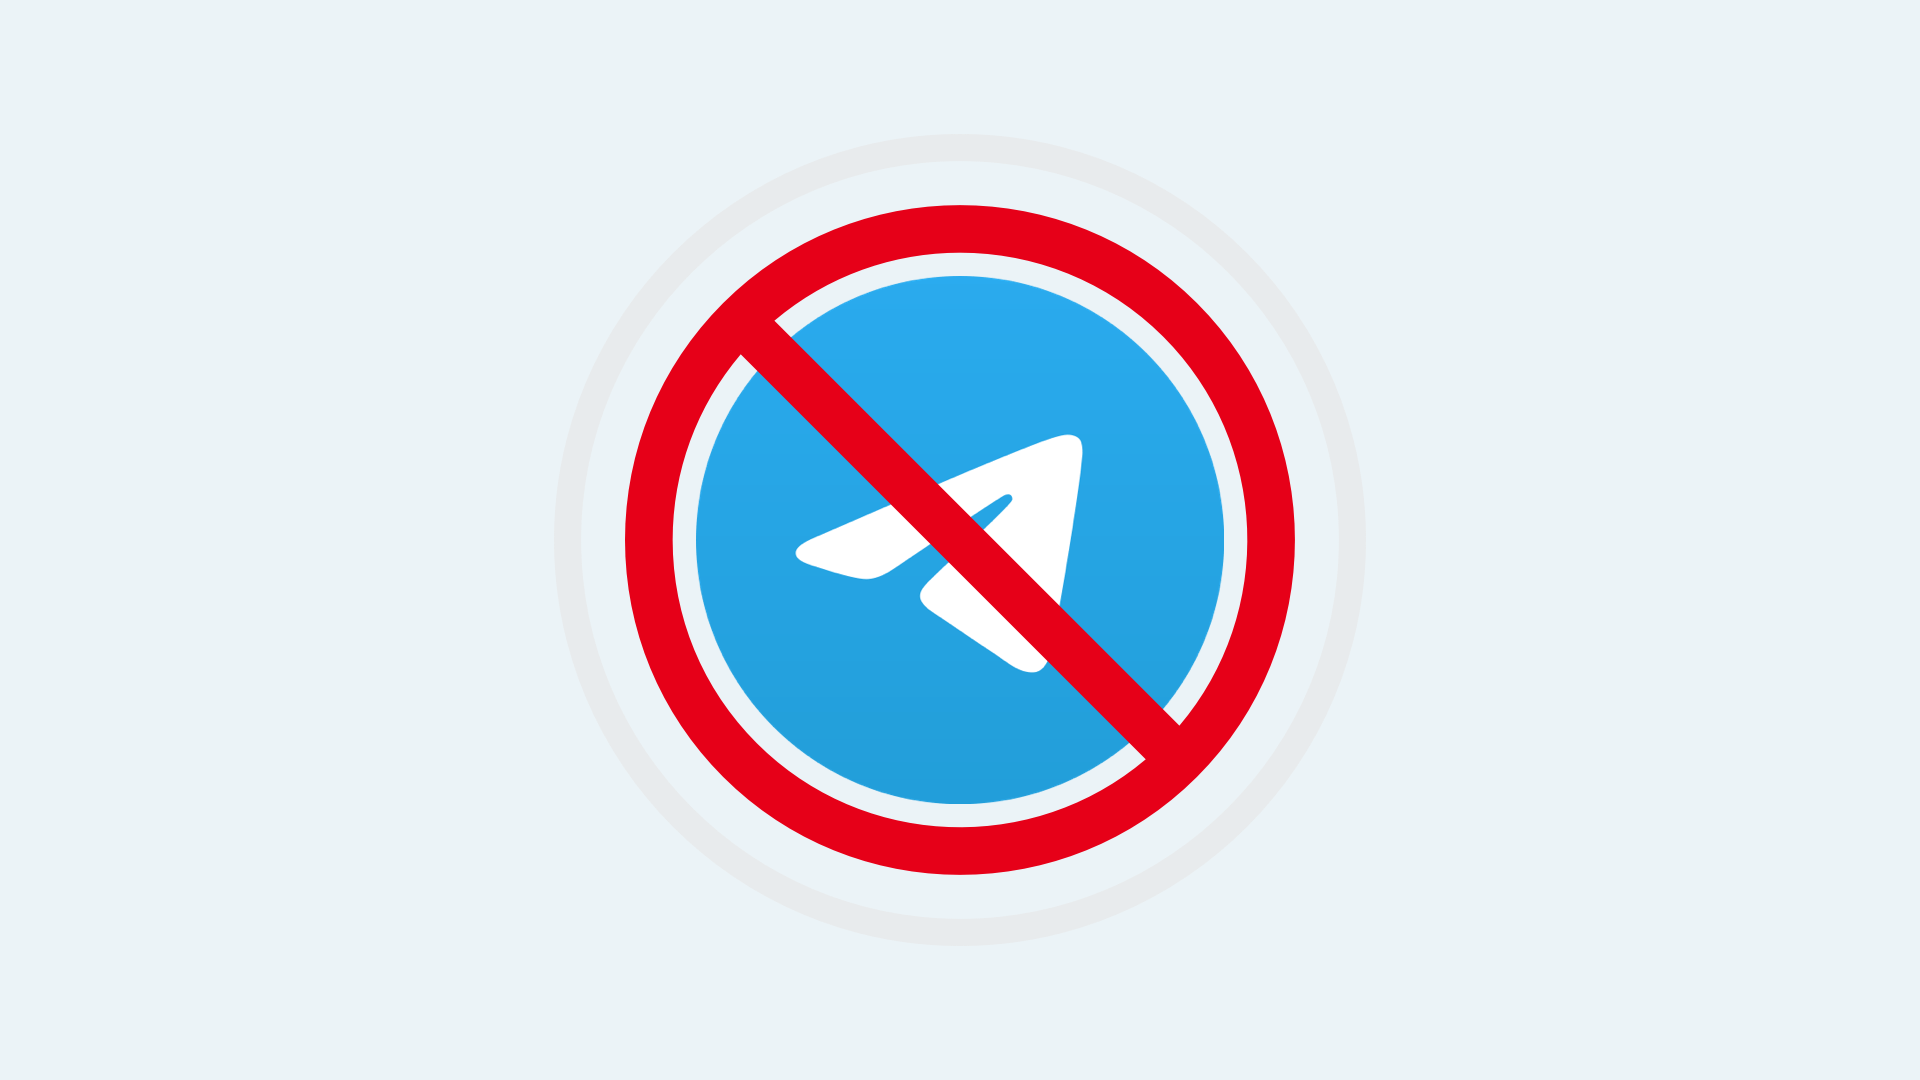 What to do if Telegram is blocked in my country or region